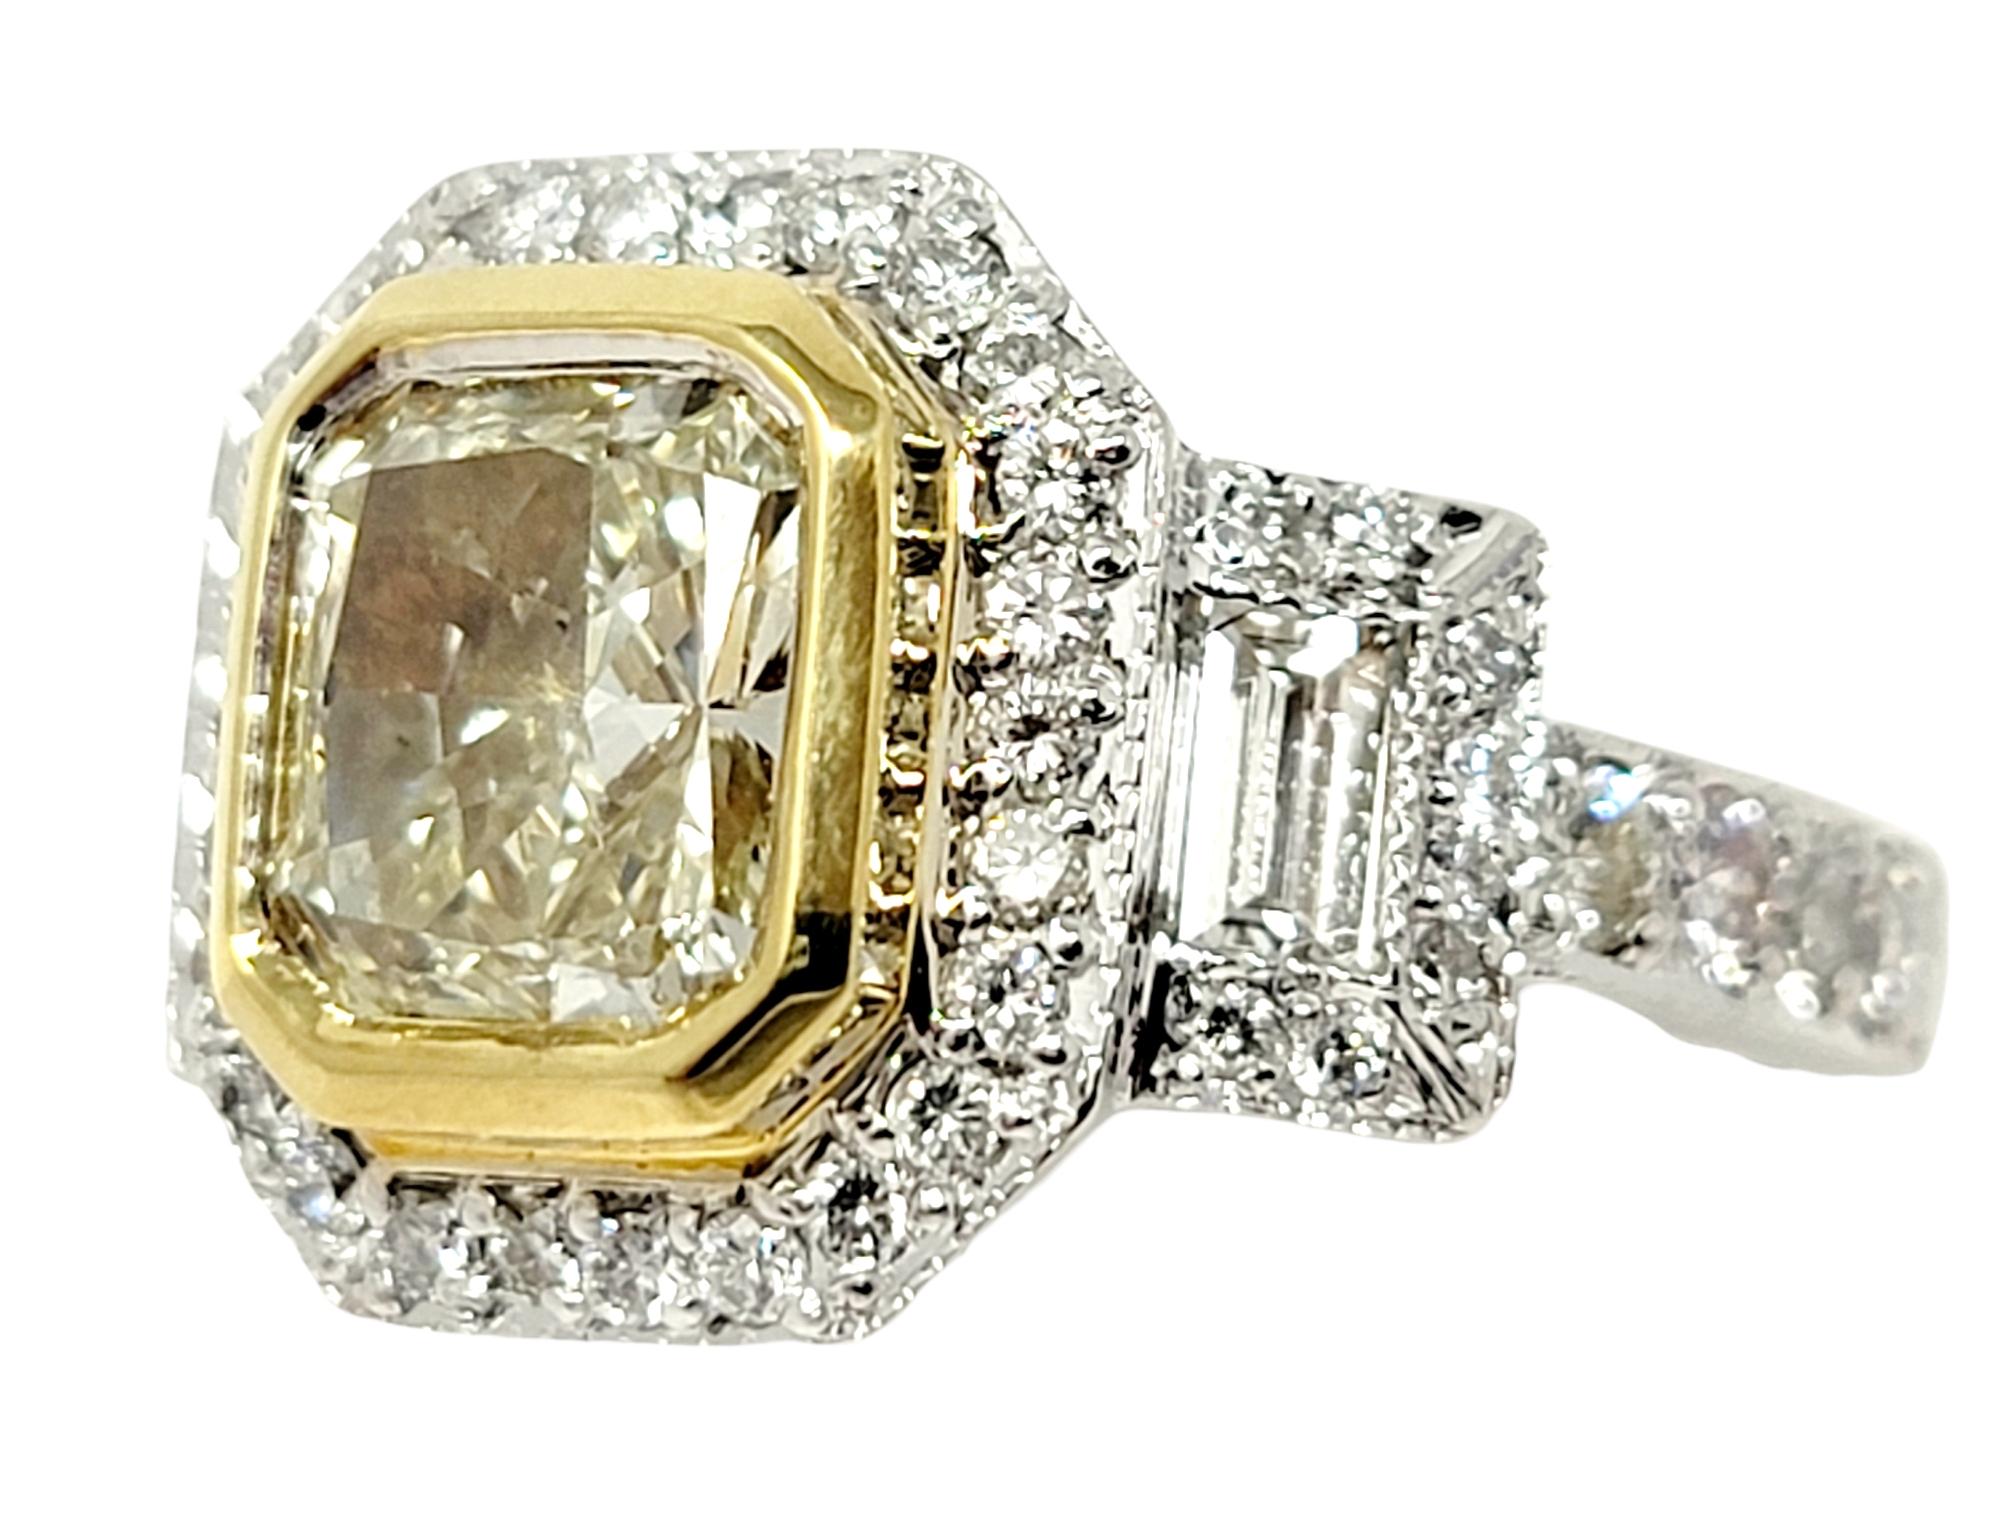 Ring size: 6

This stunning two-tone engagement ring will absolutely take your breath away! An exquisite natural light yellow diamond is paired with glittering white diamonds for an absolute work of art.  The gorgeous 1.50 carat radiant cut bezel